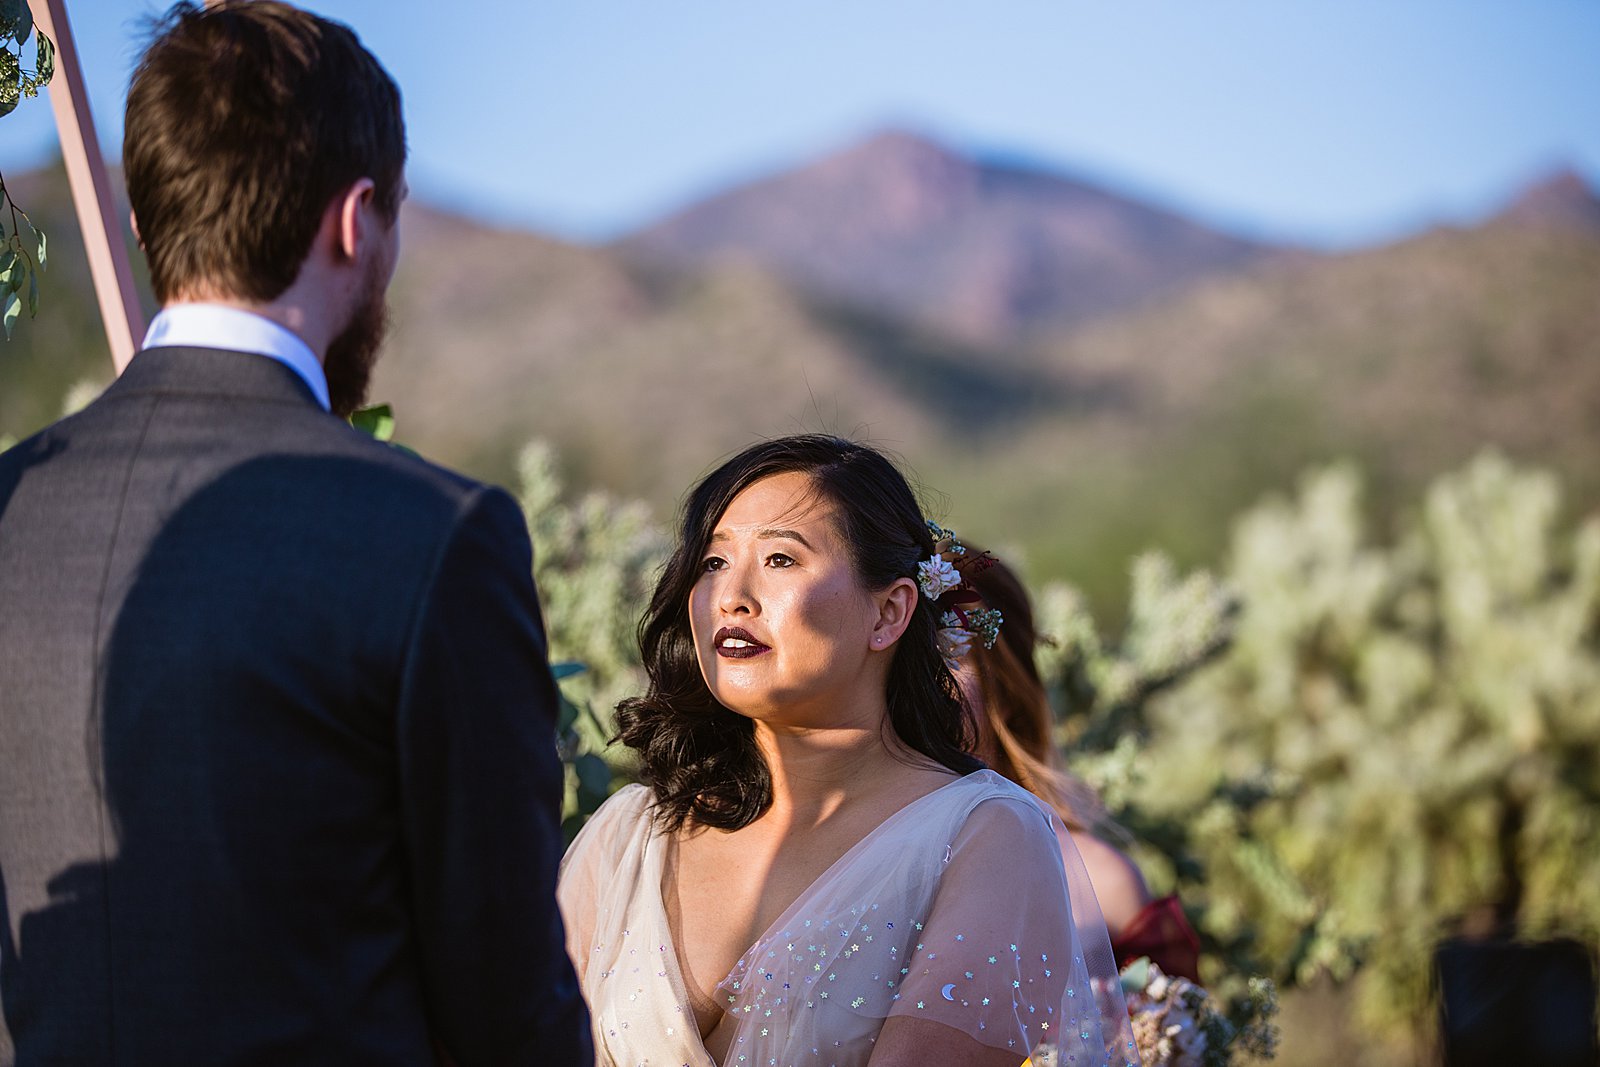 Bride looking at her groom during their wedding ceremony at the Superstition Mountains by Mesa wedding photographer PMA Photography.